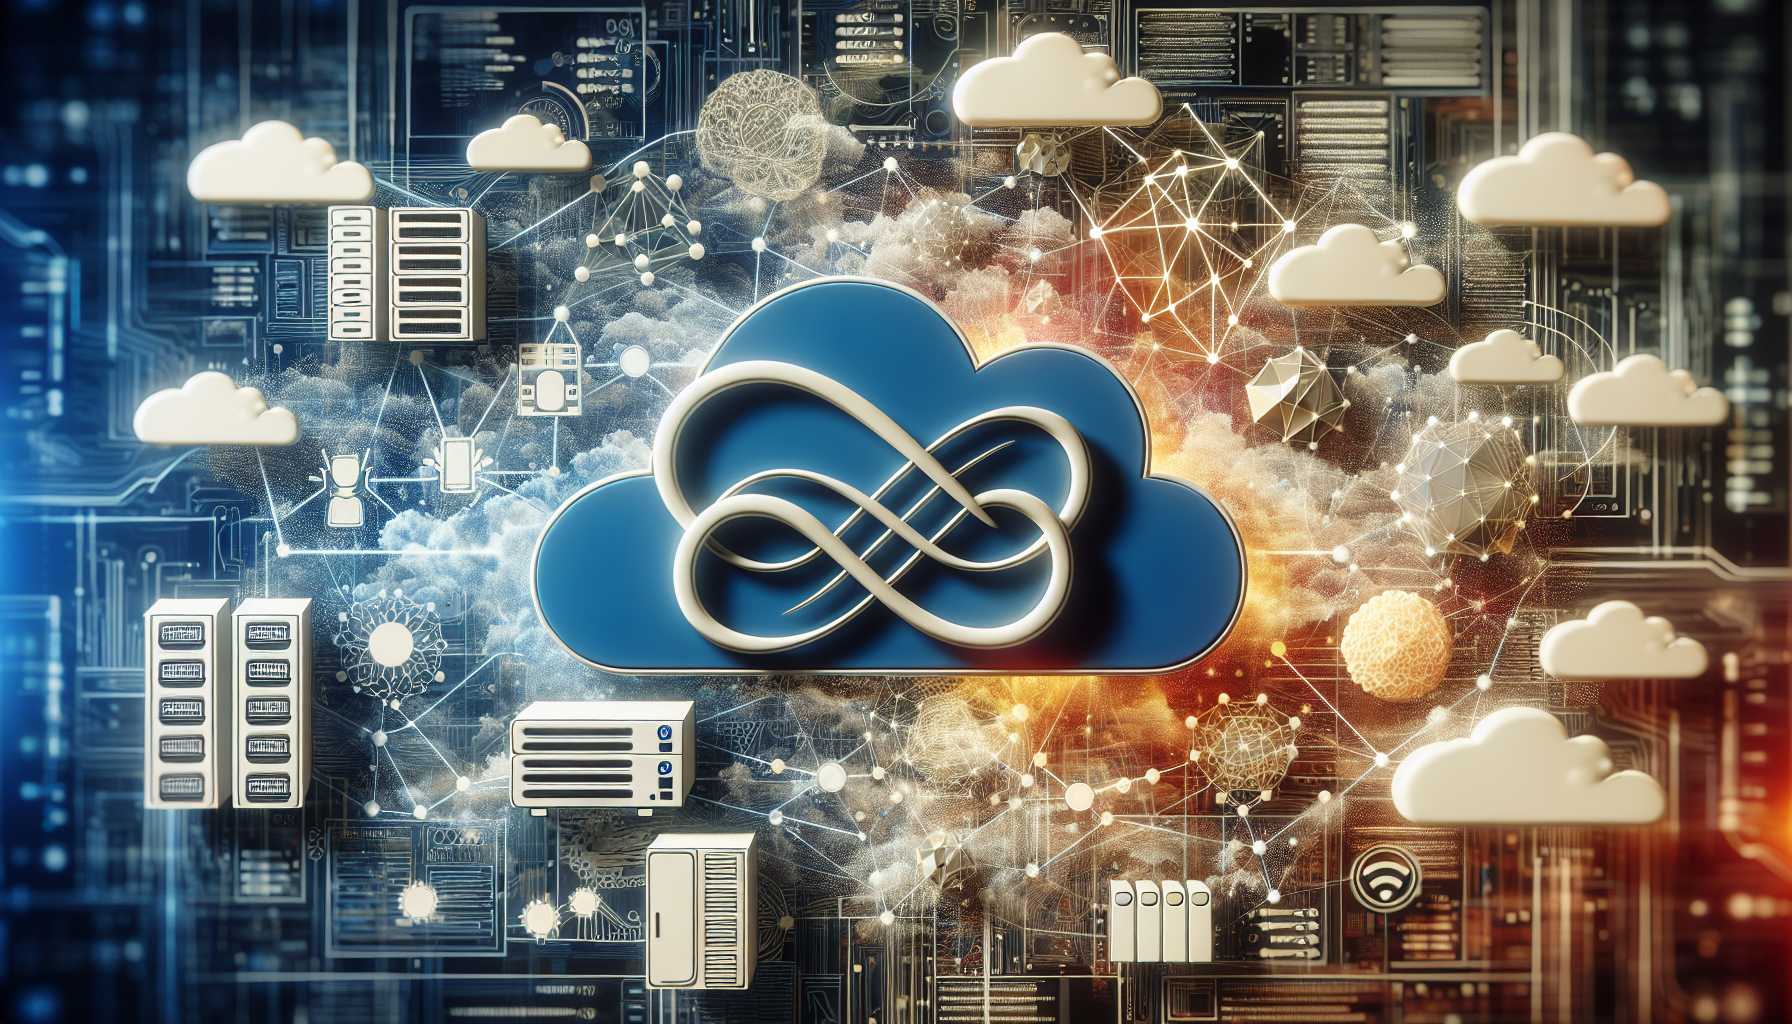 Palantir and Oracle logos merging over a backdrop of cloud computing infrastructure and AI elements